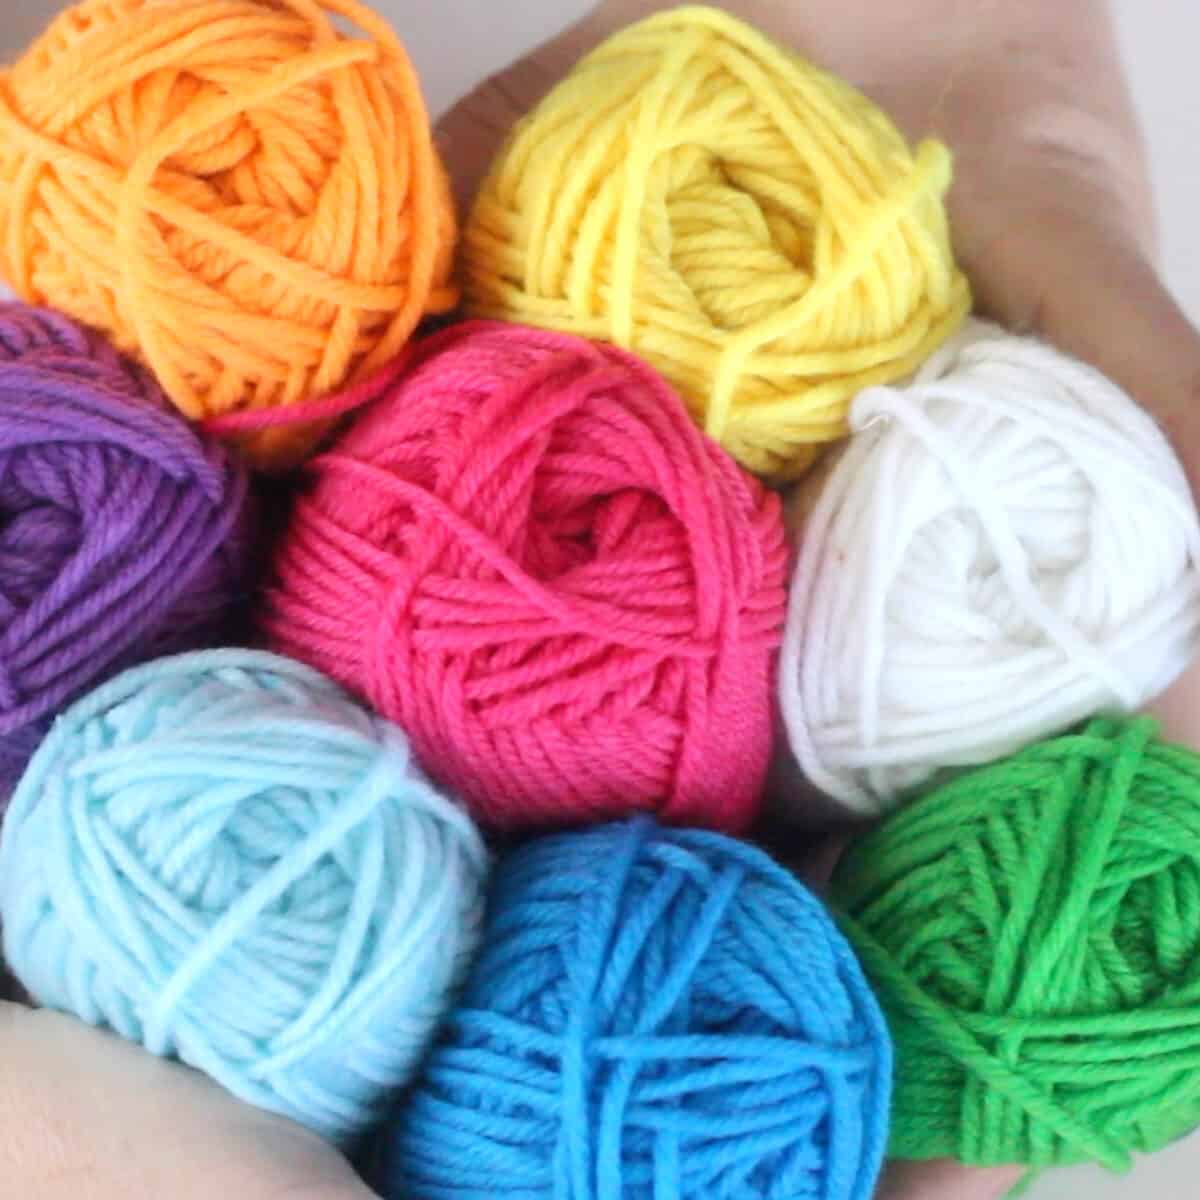 Balls of yarn in various colors of the rainbow.